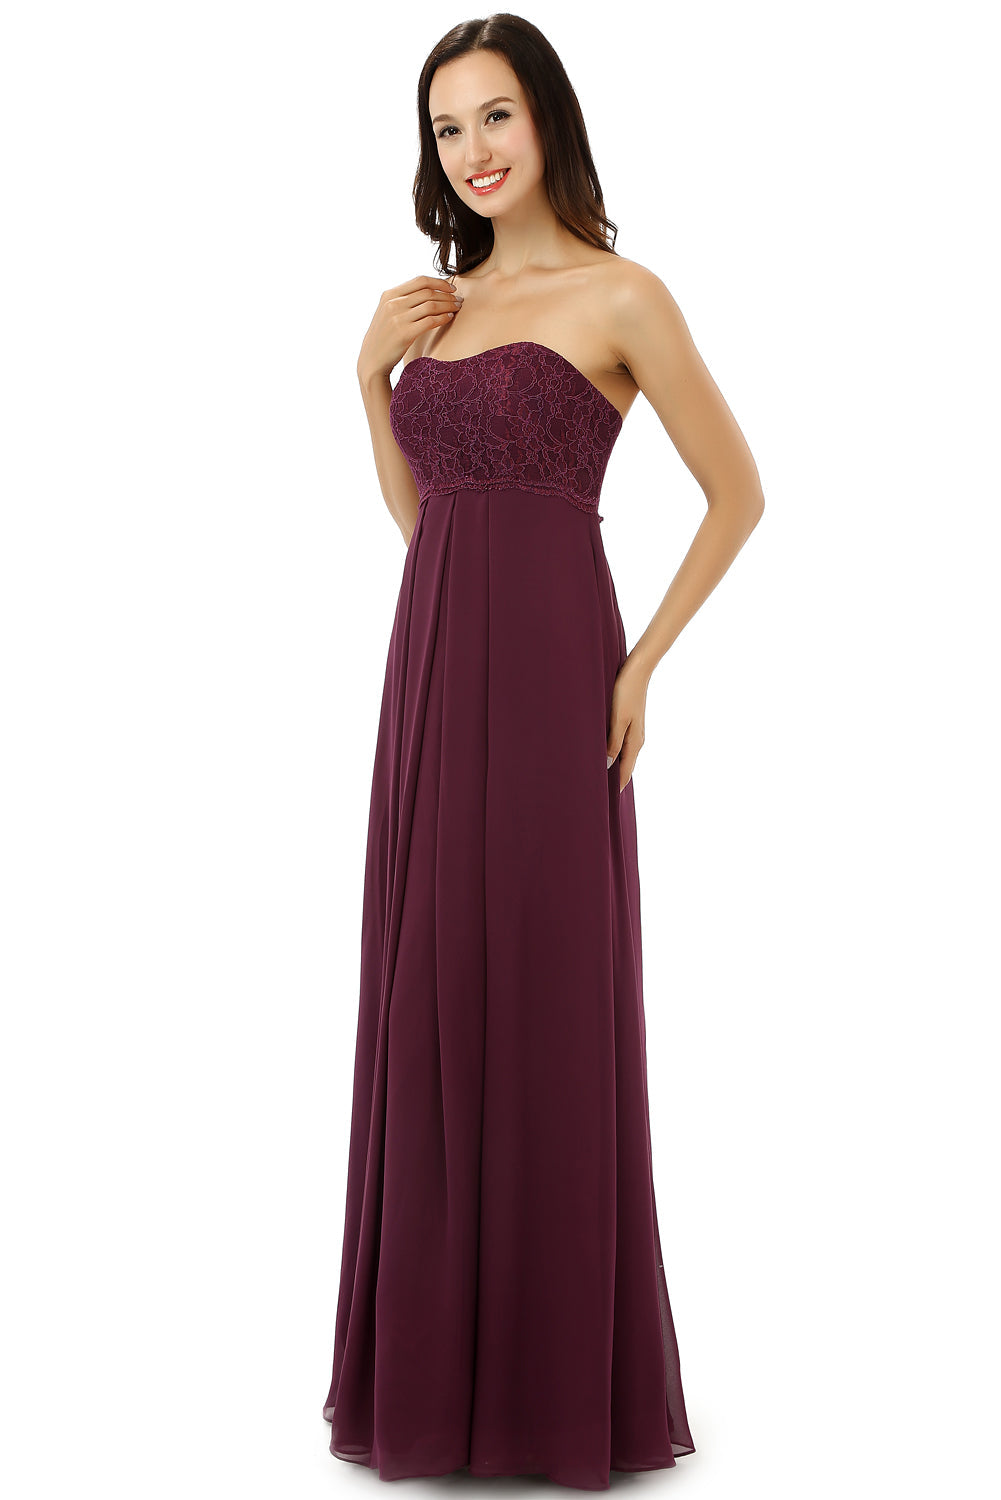 Prom Dress With Long Sleeves, Burgundy Chiffon Lace Sweetheart High Waist Bridesmaid Dresses